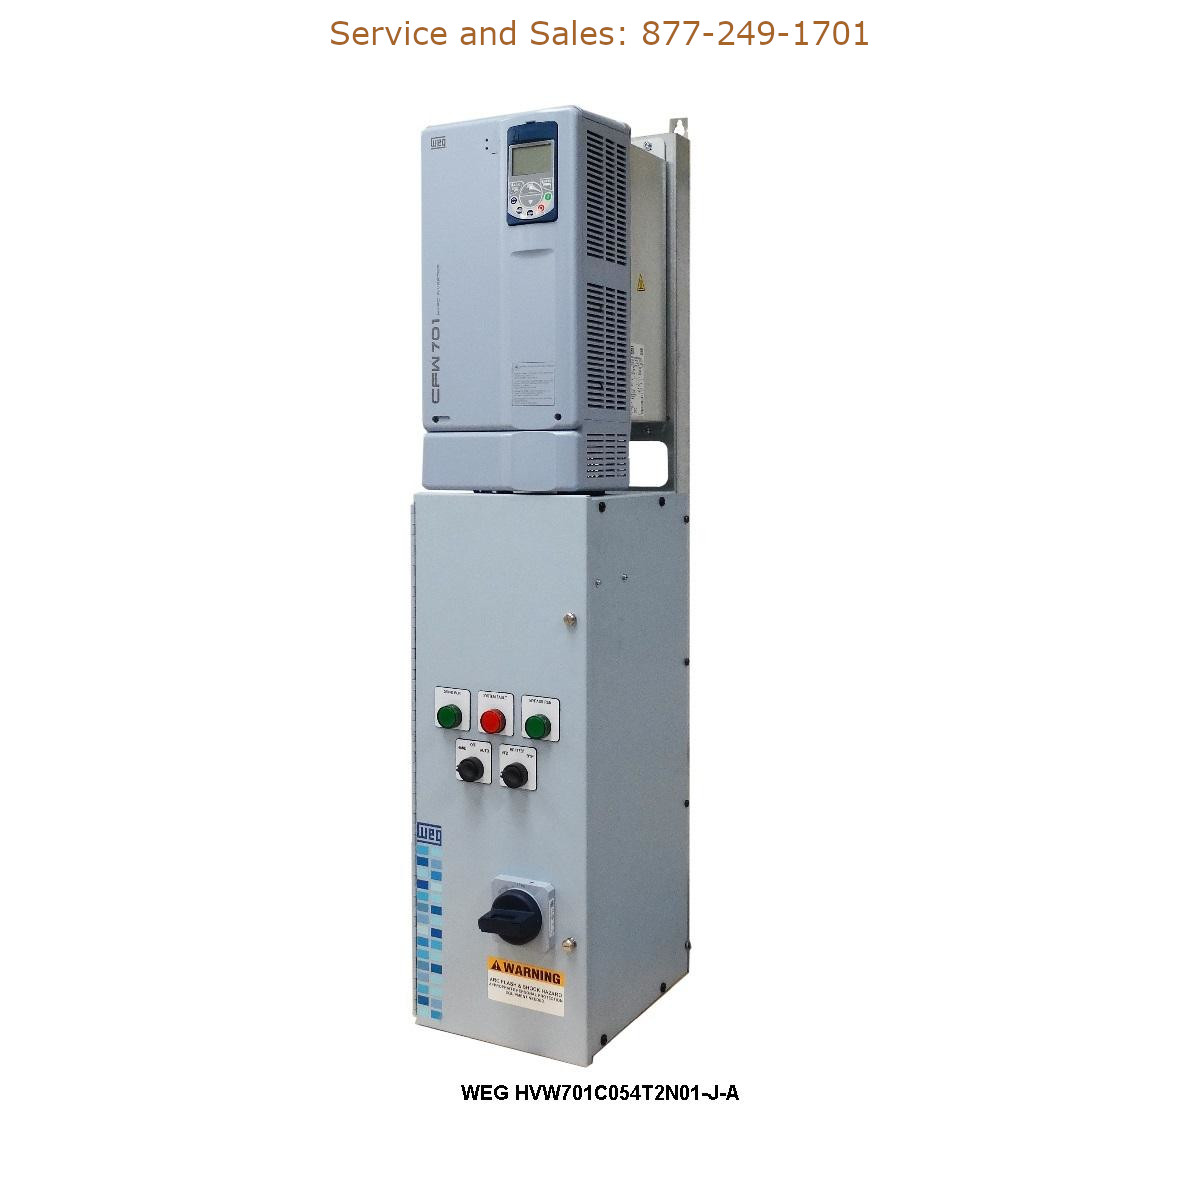 WEG HVW701C054T2N01-J-A WEG Model Number HVW701C054T2N01-J-A WEG Drives, Variable Speed Drives Repair Service, Troubleshooting, Replacement Parts https://gesrepair.com/wp-content/uploads/2022/WEG/WEG_HVW701C054T2N01-J-A_Drives_Variable_Speed_Drives.jpg